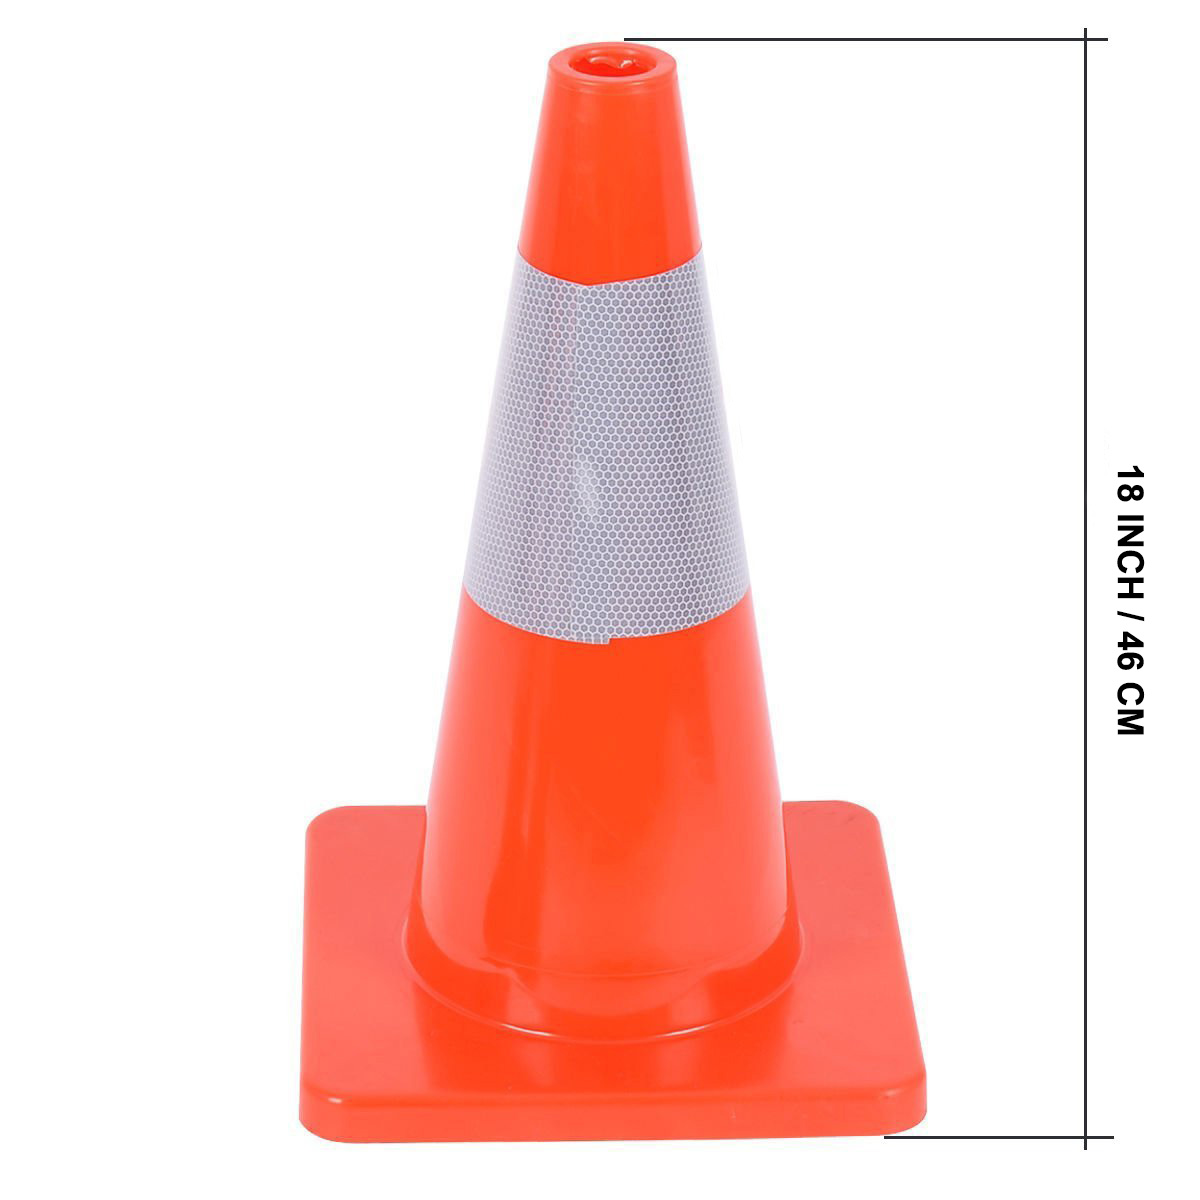 18" PVC Safety Road Parking Barrier Traffic Cone